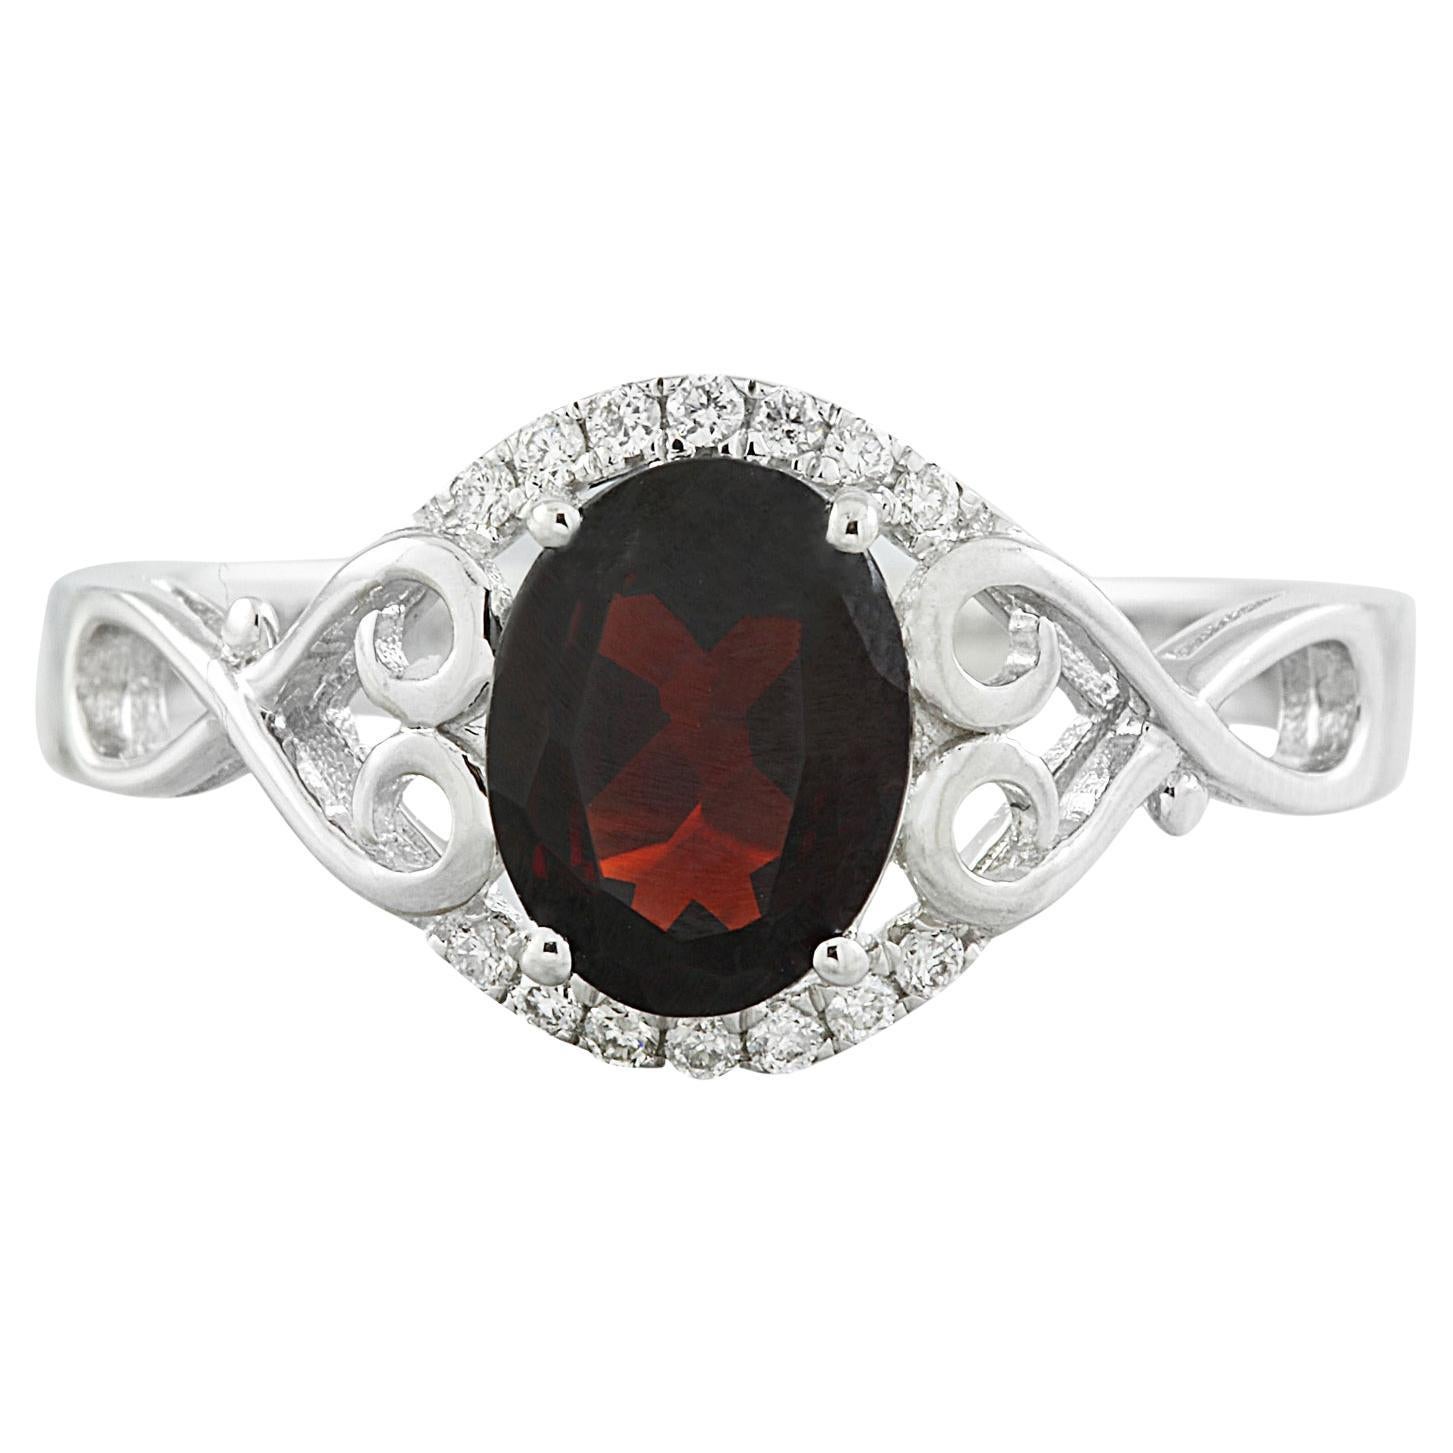 Exquisite Natural Garnet Diamond Ring in 14K Solid White Gold For Sale